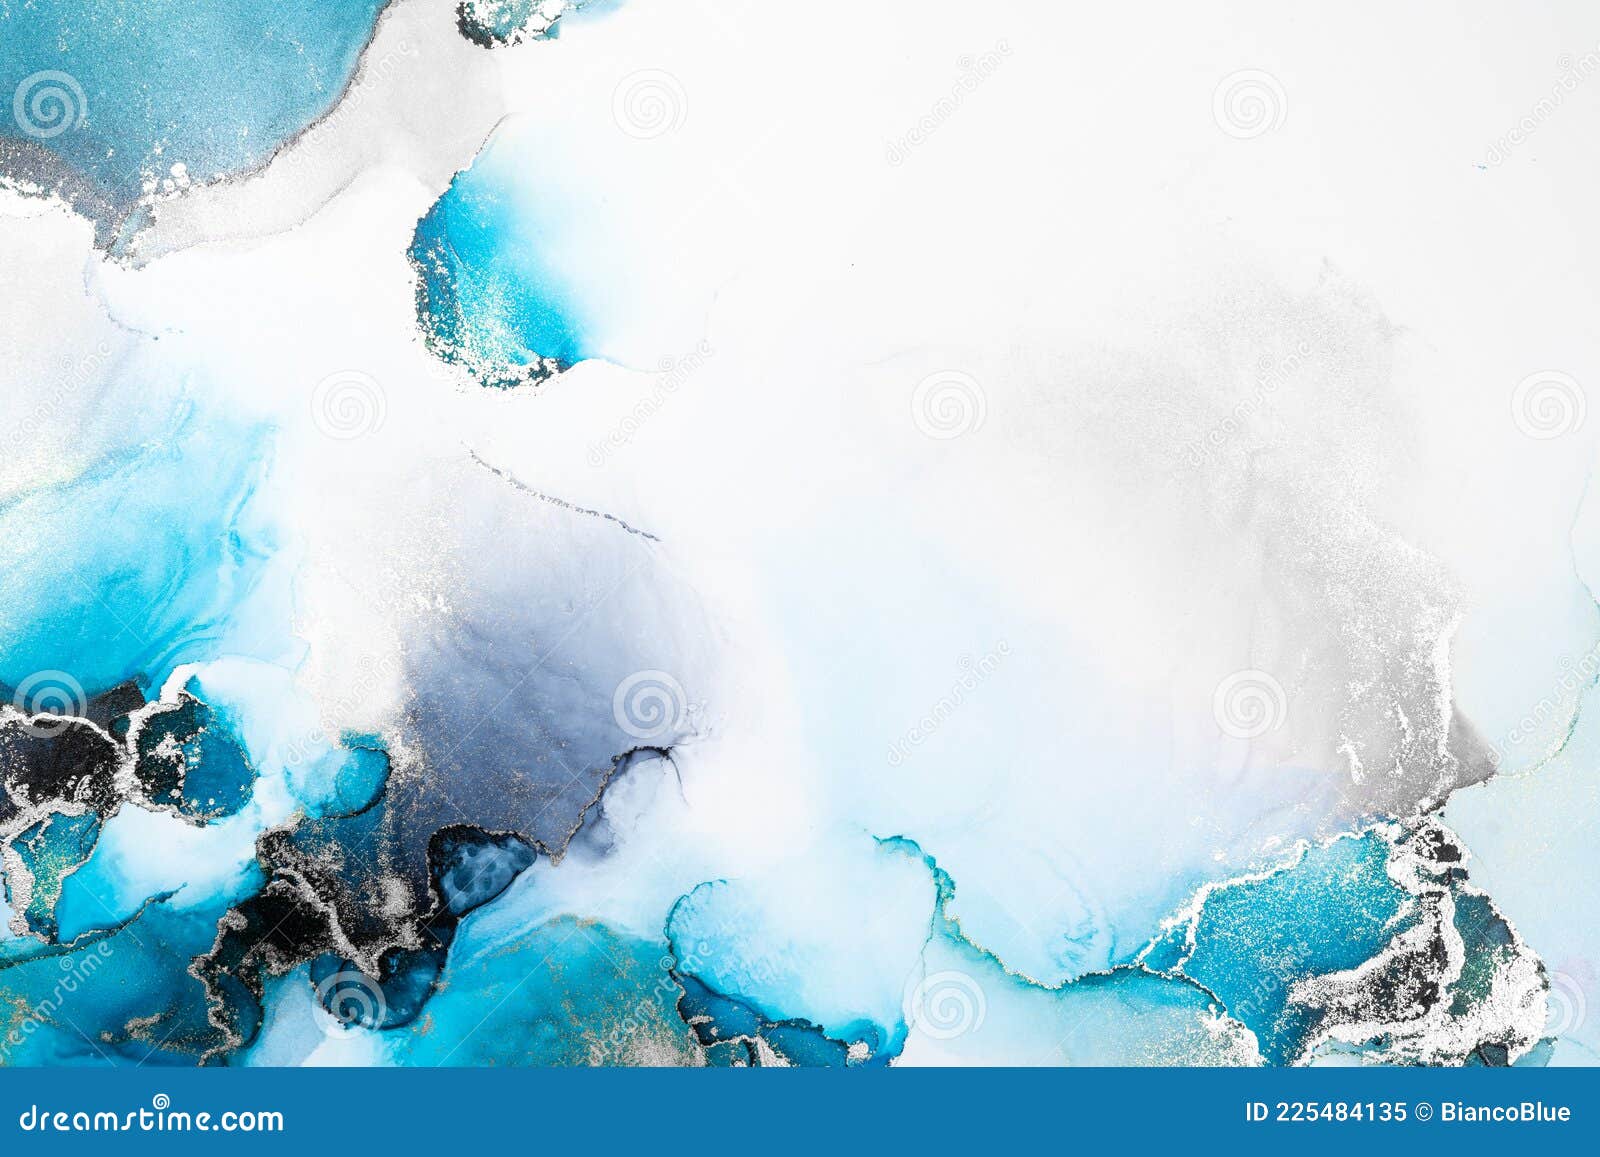 Blue Silver Abstract Background of Marble Liquid Ink Art Painting on Paper  . Stock Illustration - Illustration of wallpaper, paint: 229125140